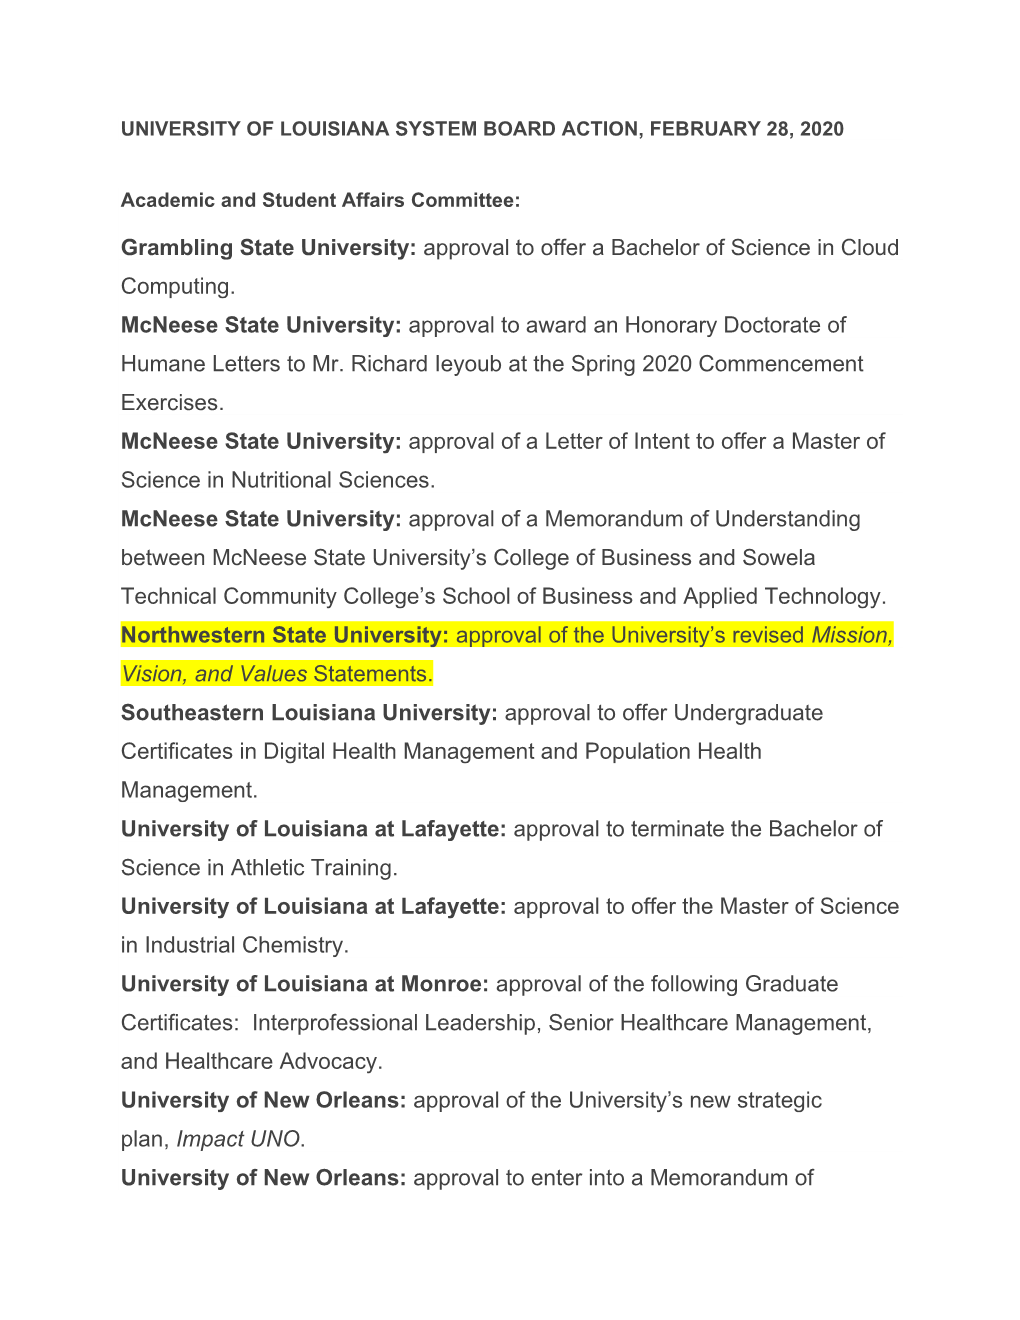 Grambling State University: Approval to Offer a Bachelor of Science in Cloud Computing